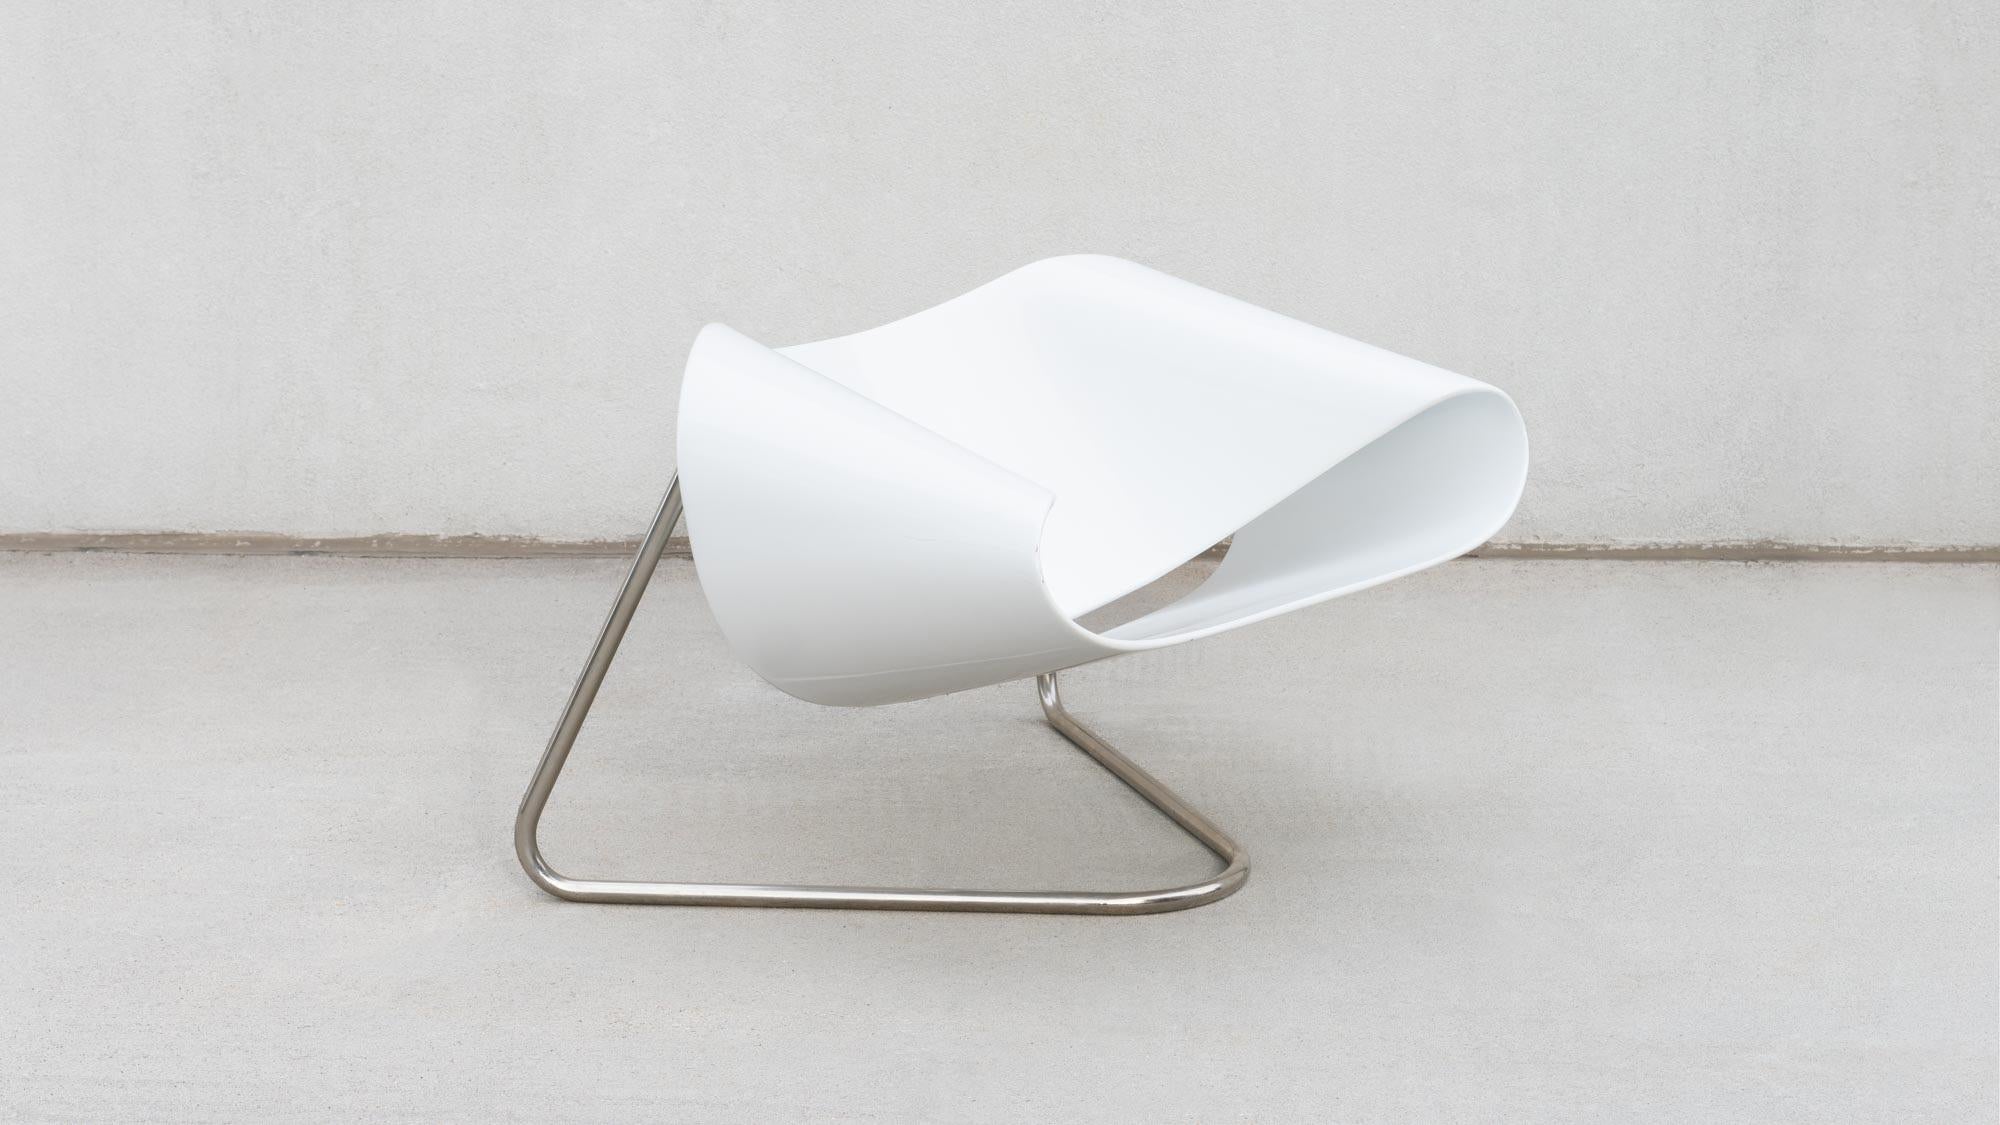 ‘CL9’ RIBBON CHAIR
CESARE LEONARDI AND FRANCA STAGI FOR FIARM / BERNINI C.1961

CL9 Ribbon chair by Cesare Leonardi and Franca Stagi, also known as ‘the easy chair’. A tubular chromed frame supports one continuous band of molded fiberglass. The seat